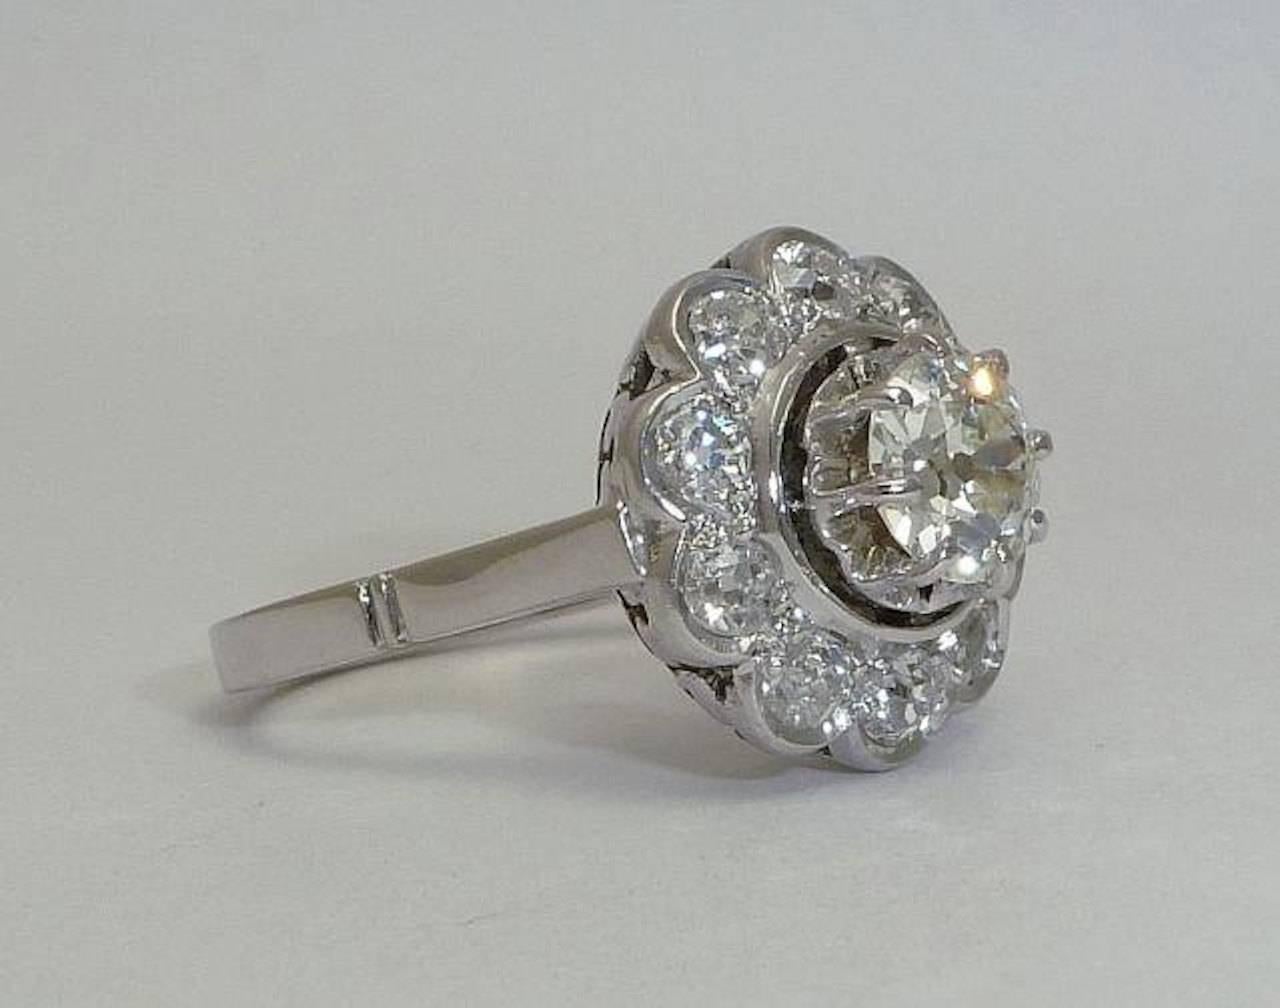 Beacon Hill Jewelers Presents:

A beautiful original art deco period French diamond engagement ring in platinum and 18 karat white gold. Centered by a sparkling high quality old European cut diamond, this ring features a halo of ten beautiful